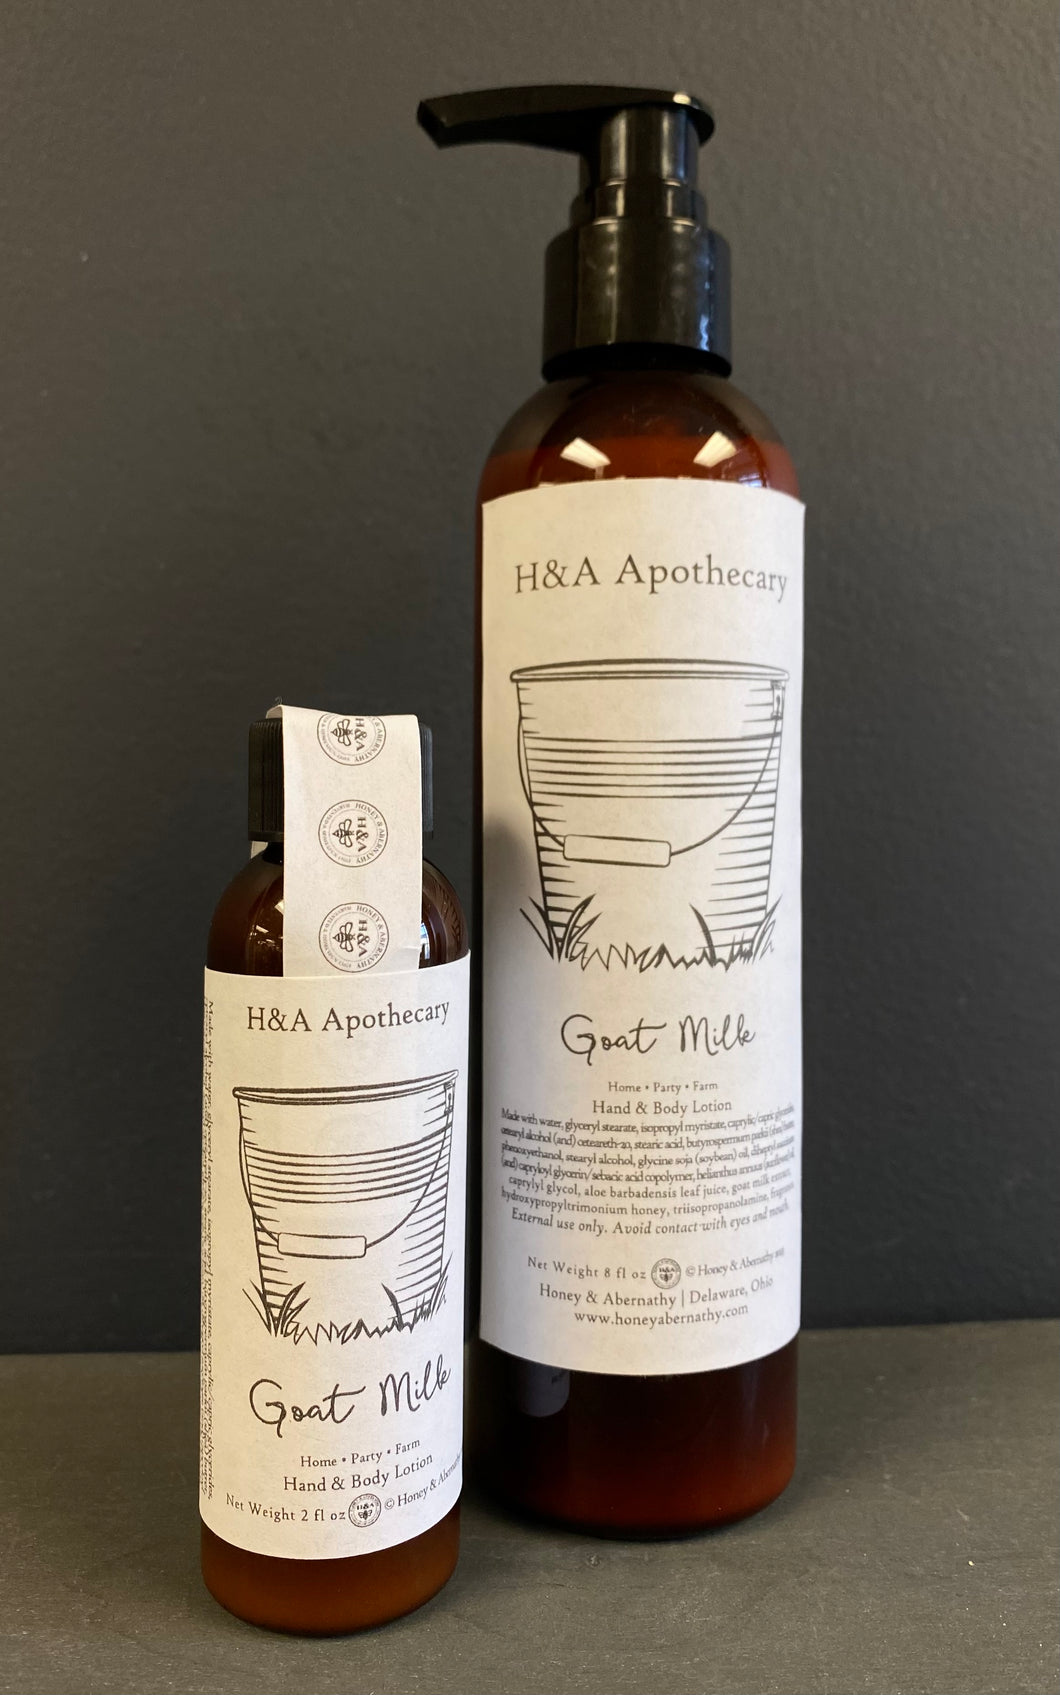 H&A Apothecary Goat Milk Hand & Body Lotion